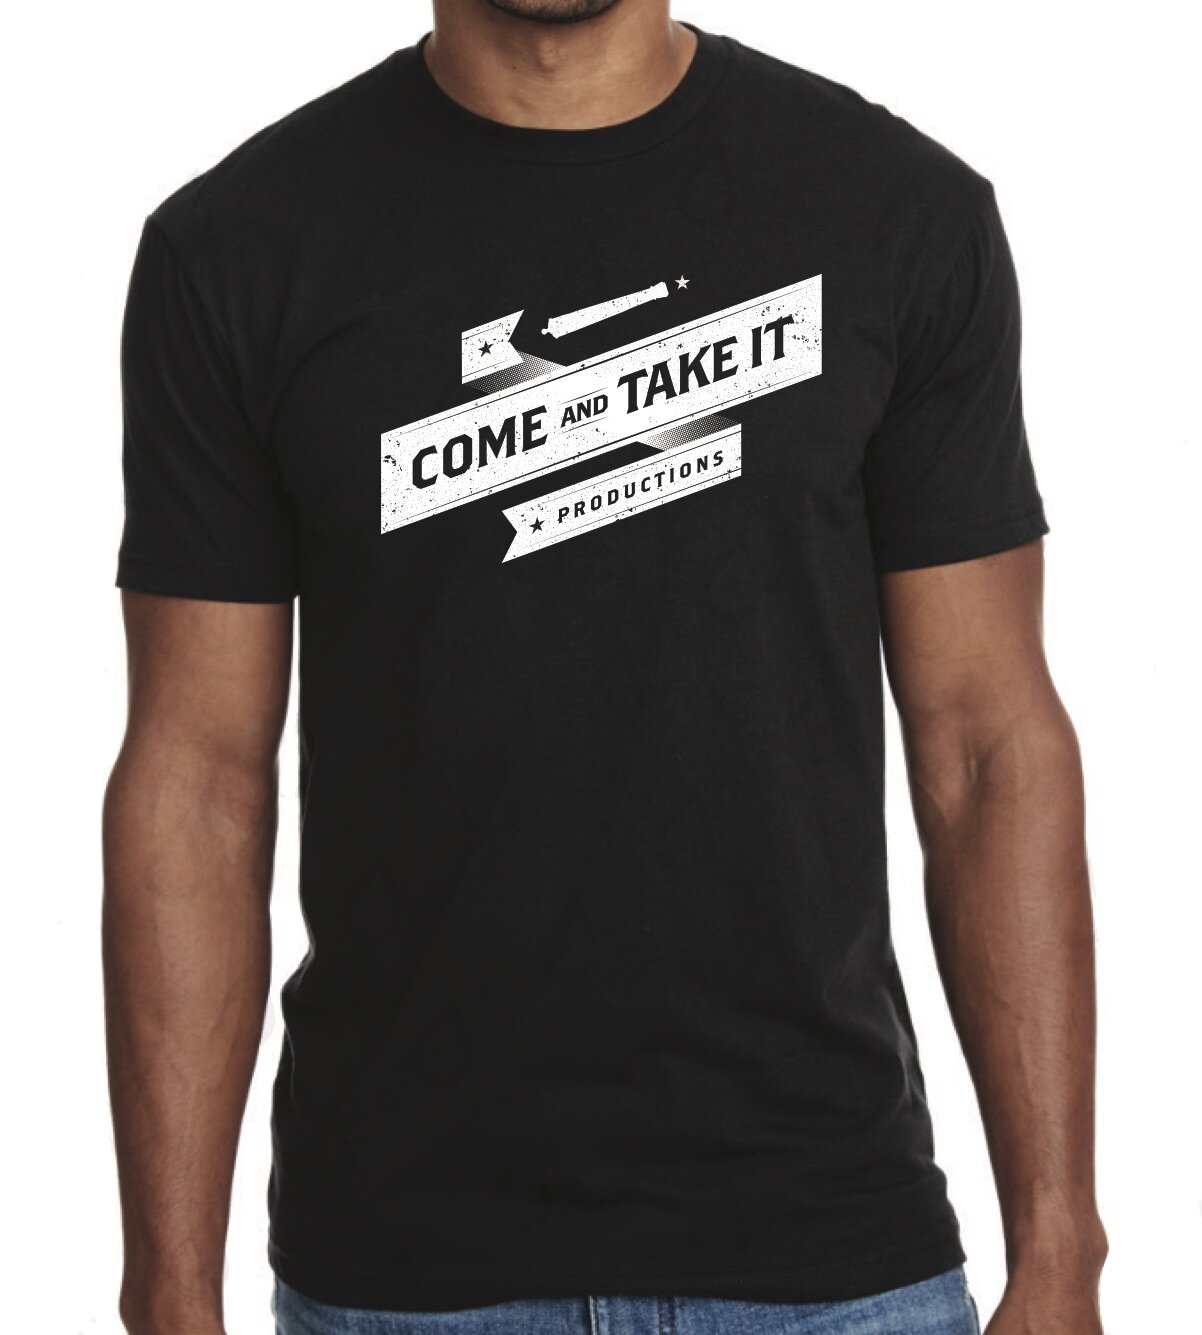 Come and Take It Productions t-shirt